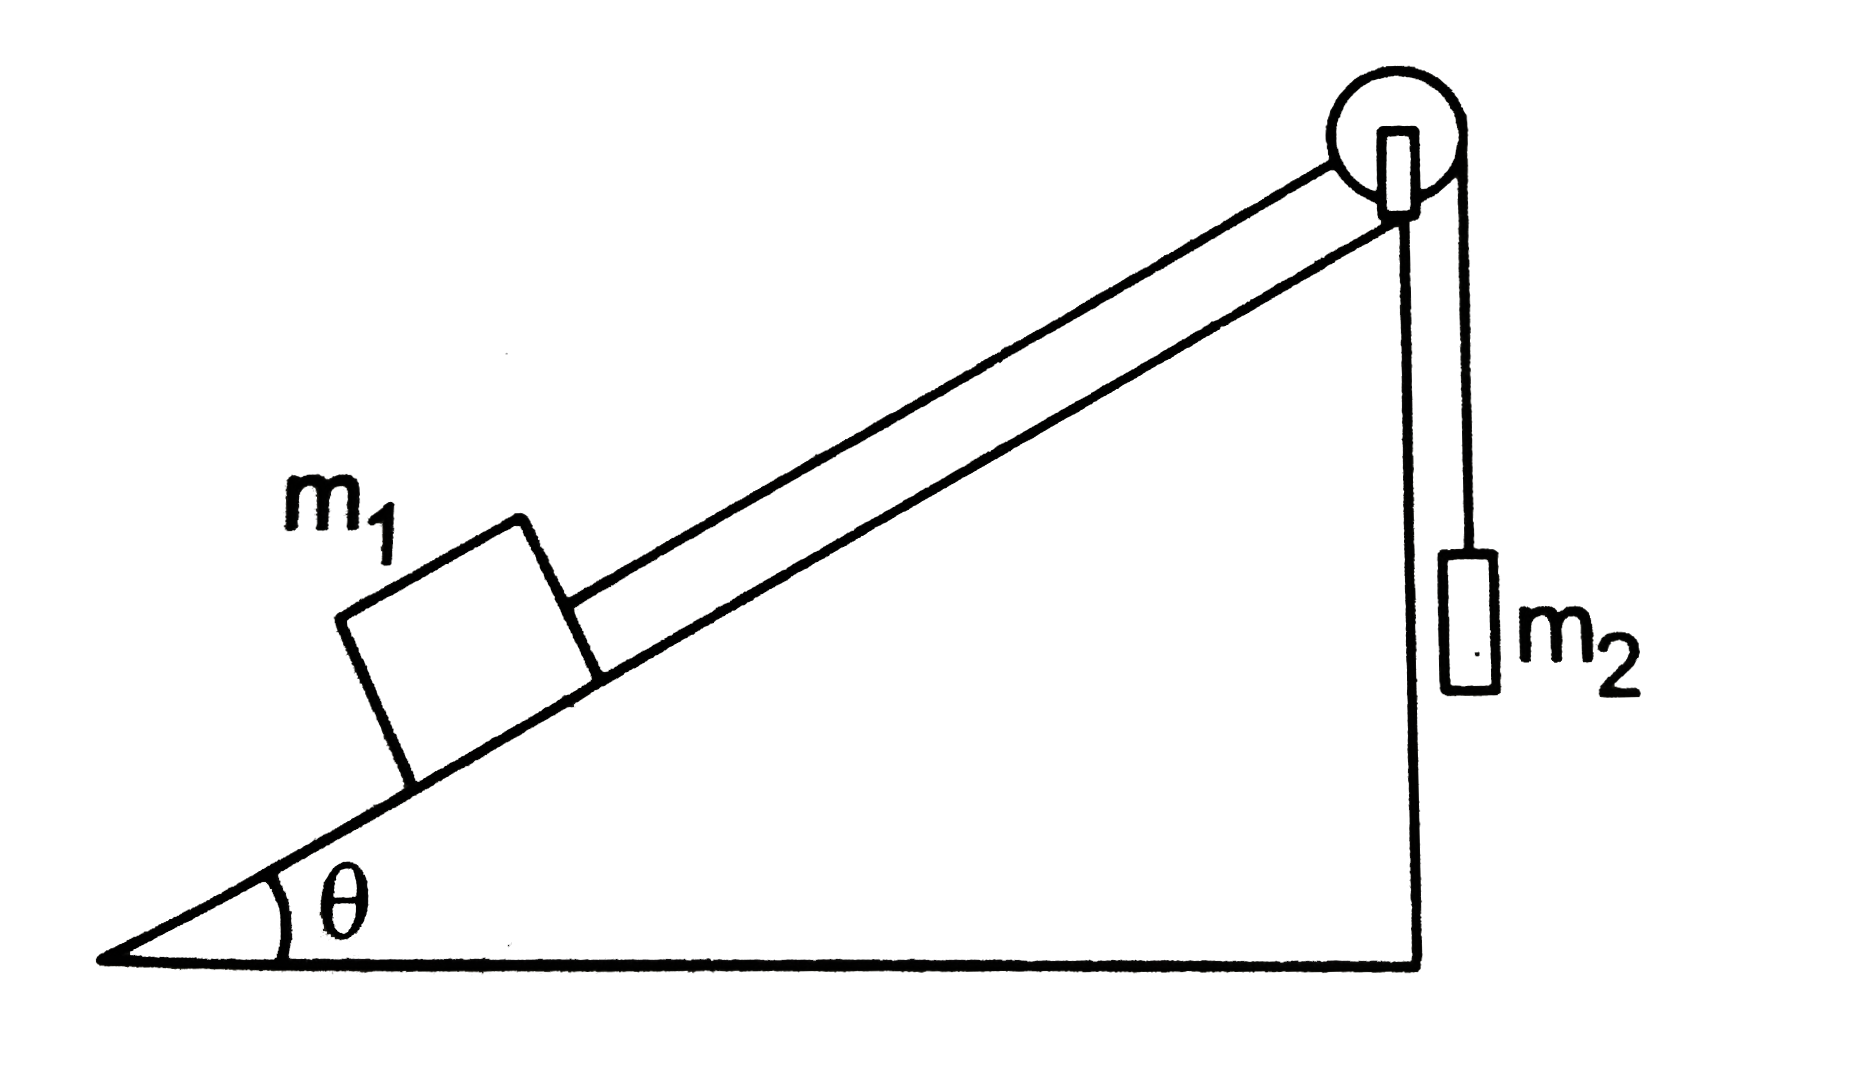 Two bodies of masses m1 and m2 are connected by a light  string going over a smooth lilght pulley at the end of an incline. The mass1 lies on the incline m2 hangs vertically. The system is t rest. Find the angle of the incline and the fore exerted by the incline on the body of mass m1.